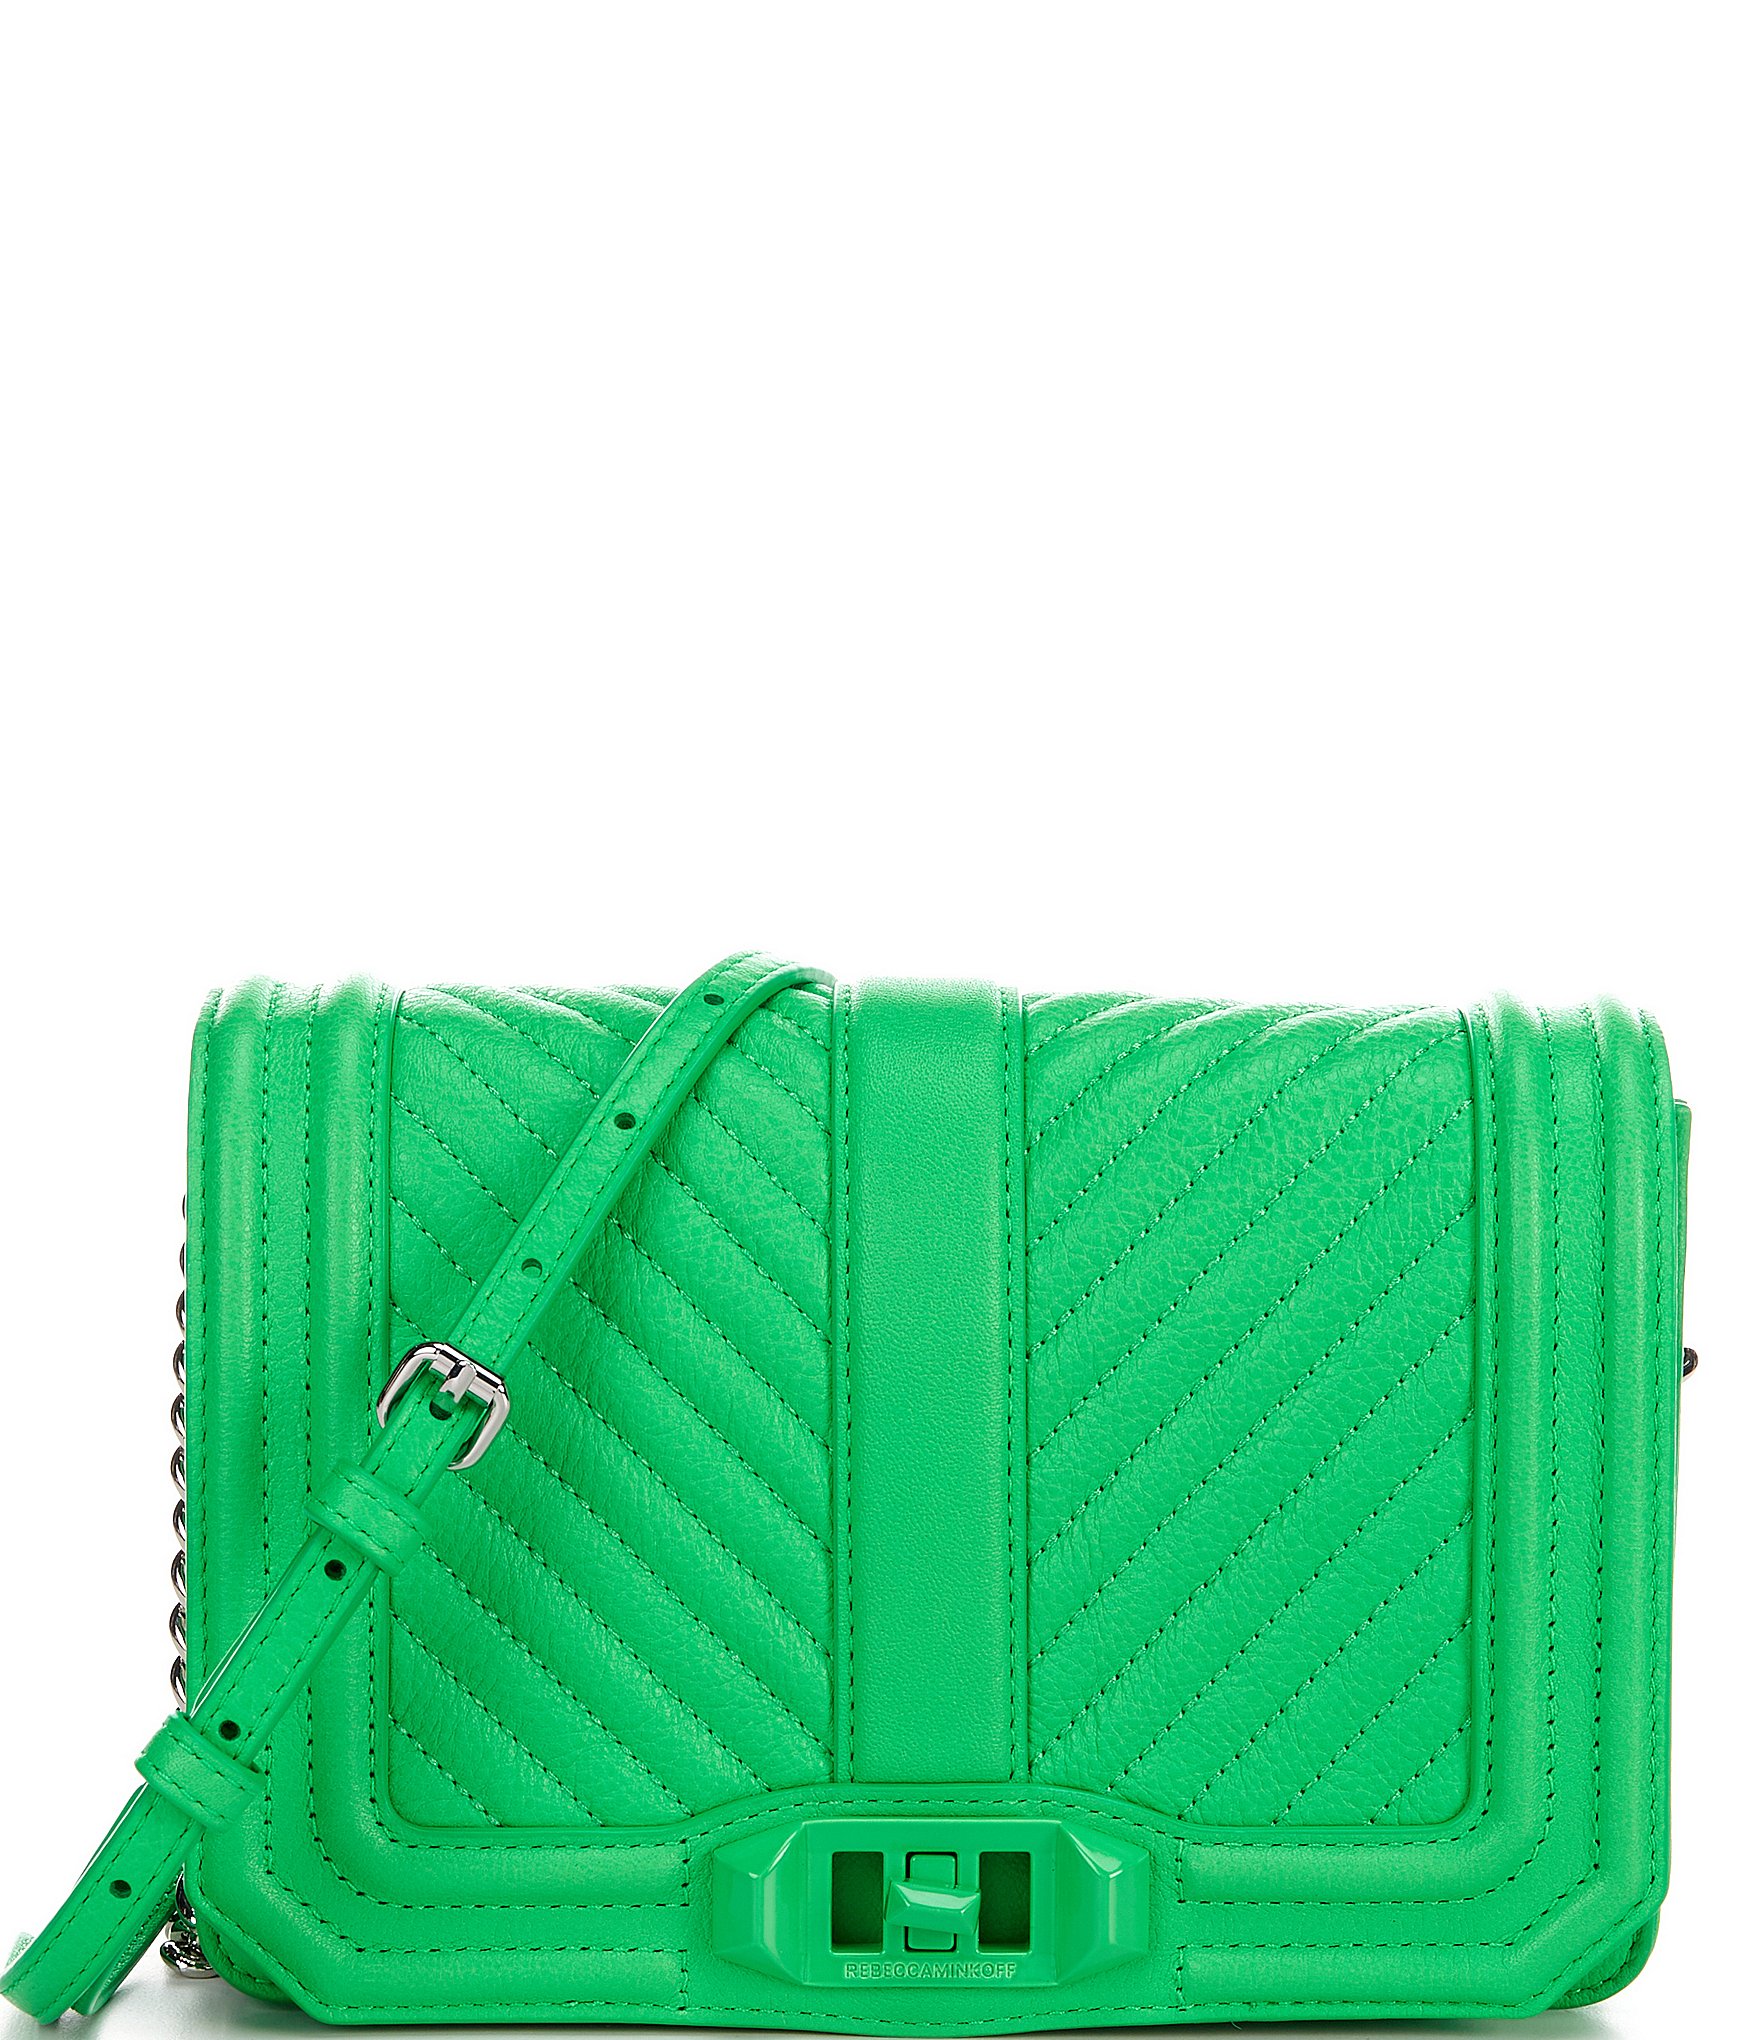 Rebecca Minkoff Love Chevron Quilted Leather Crossbody Bag